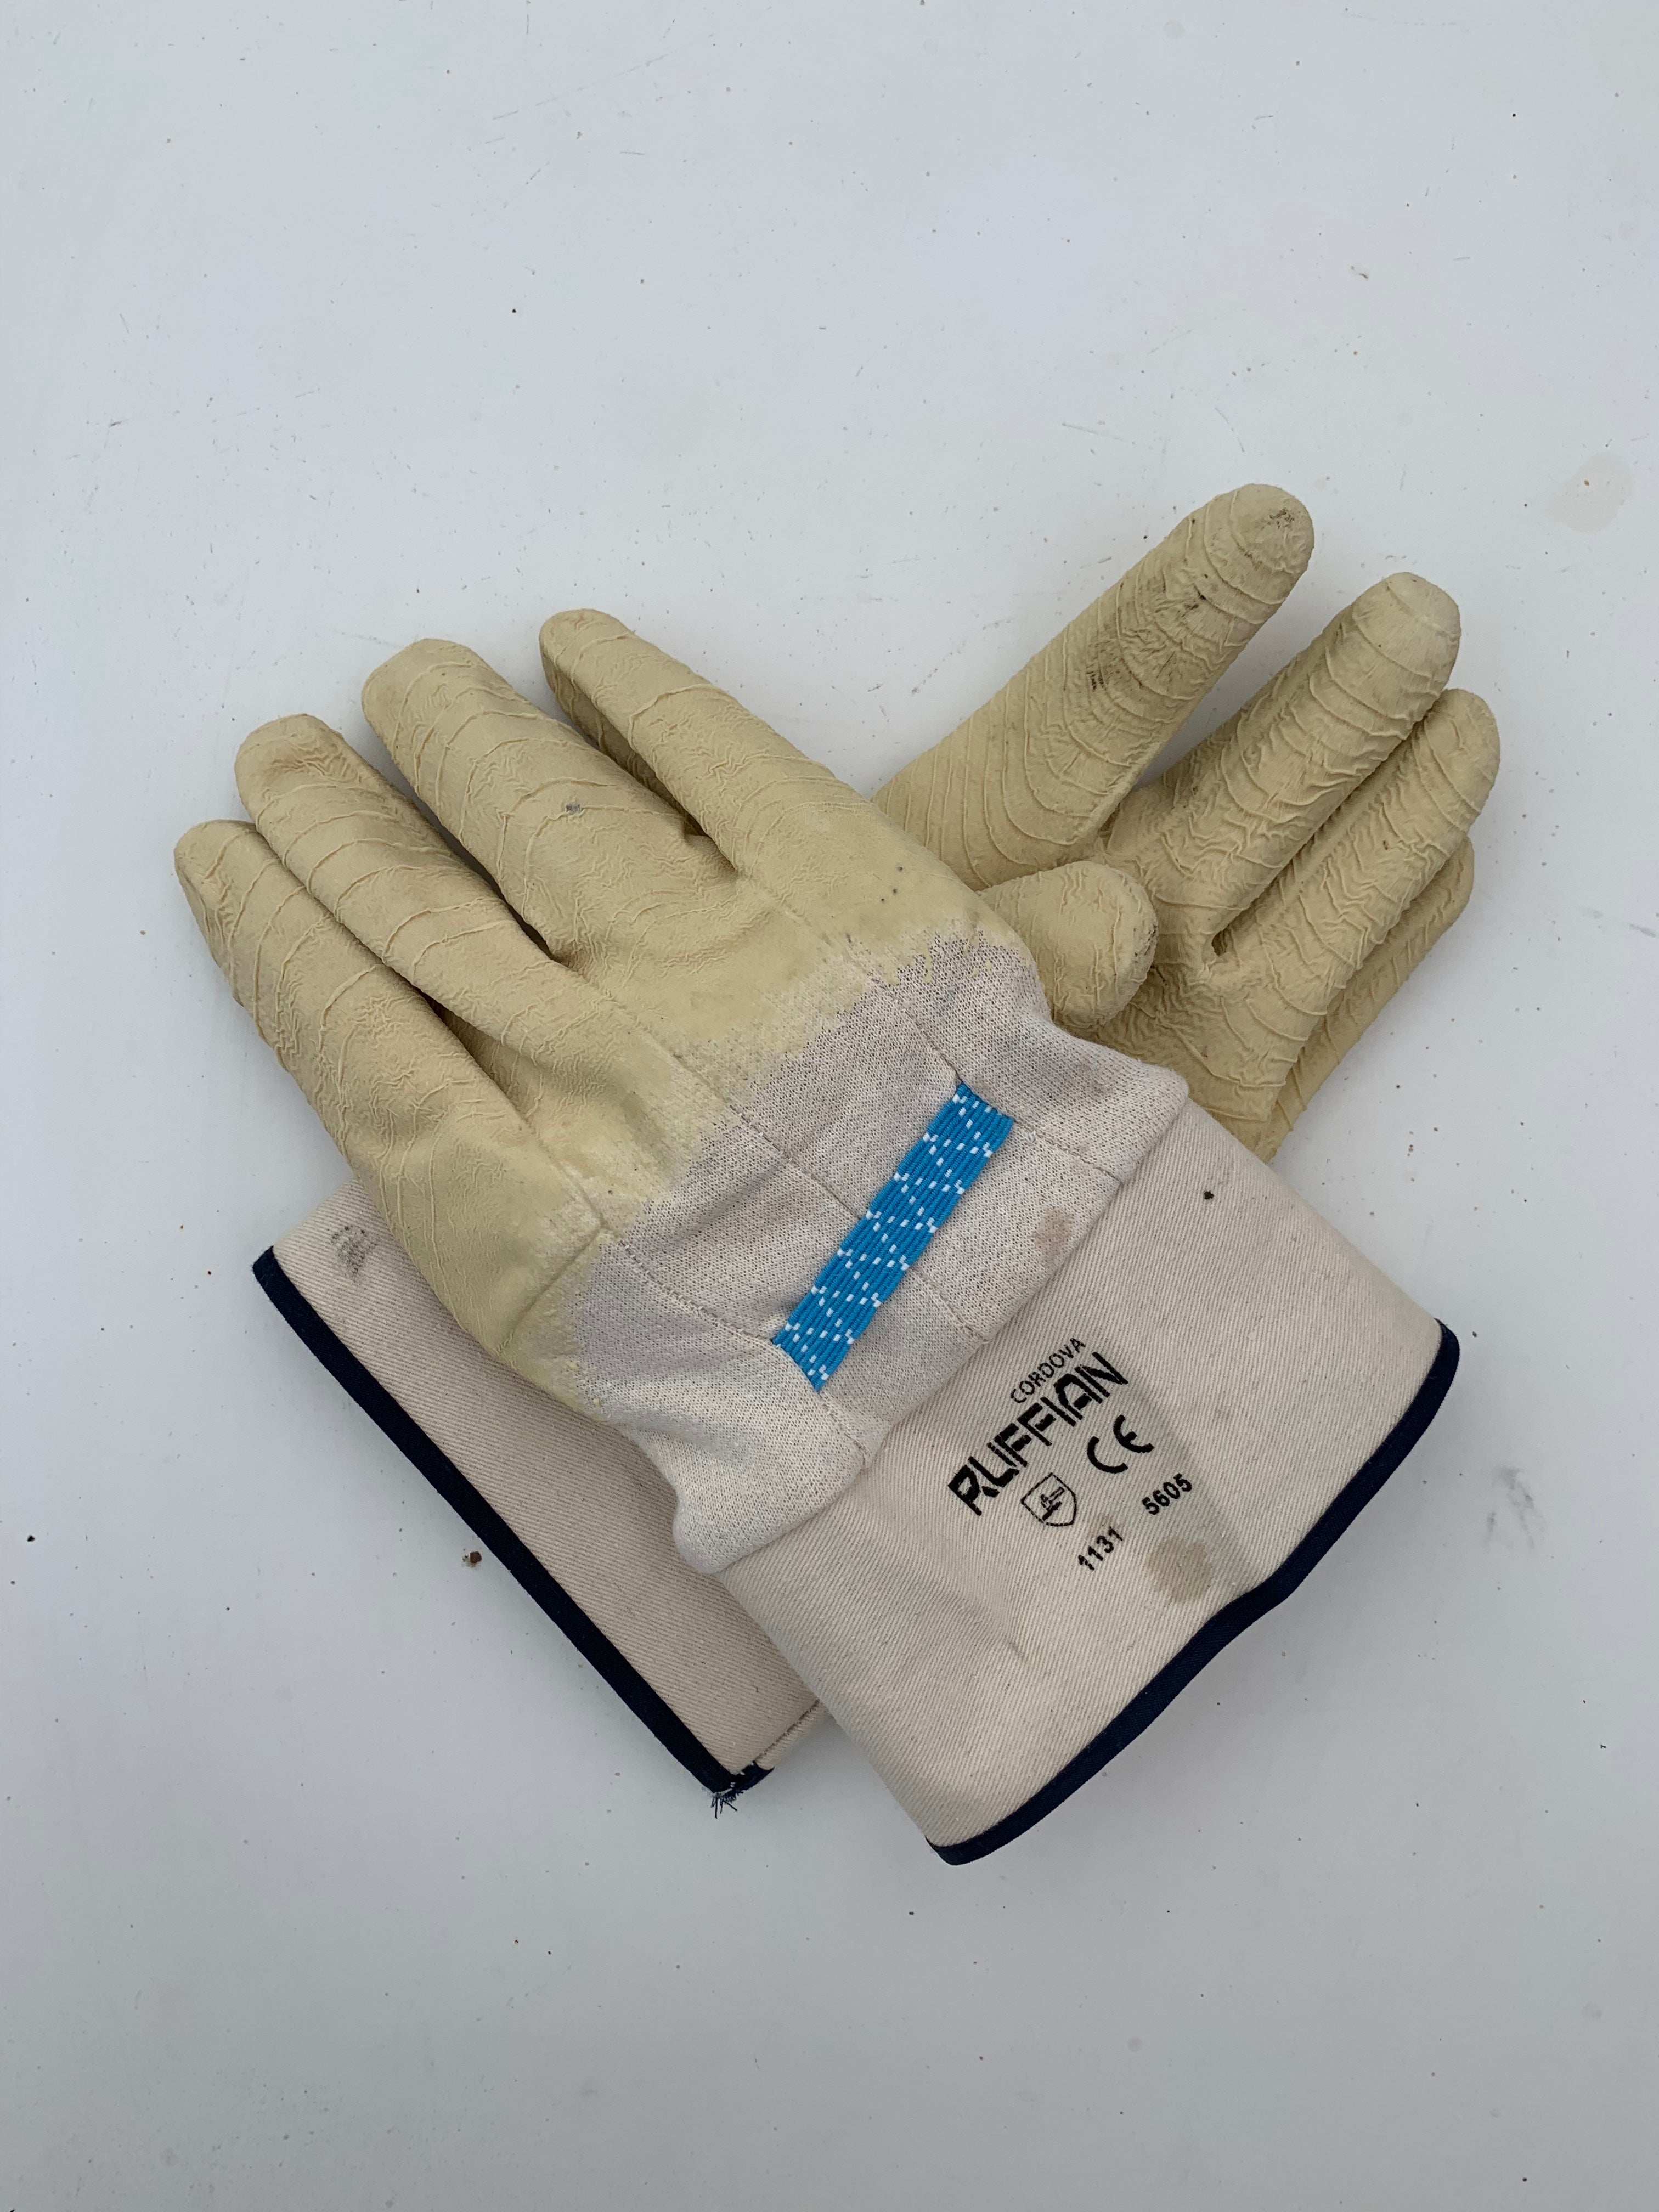 Find Oyster Shucking Gloves Pair The Maryland Store Online Sale Online in  our store you'll love at affordable costs